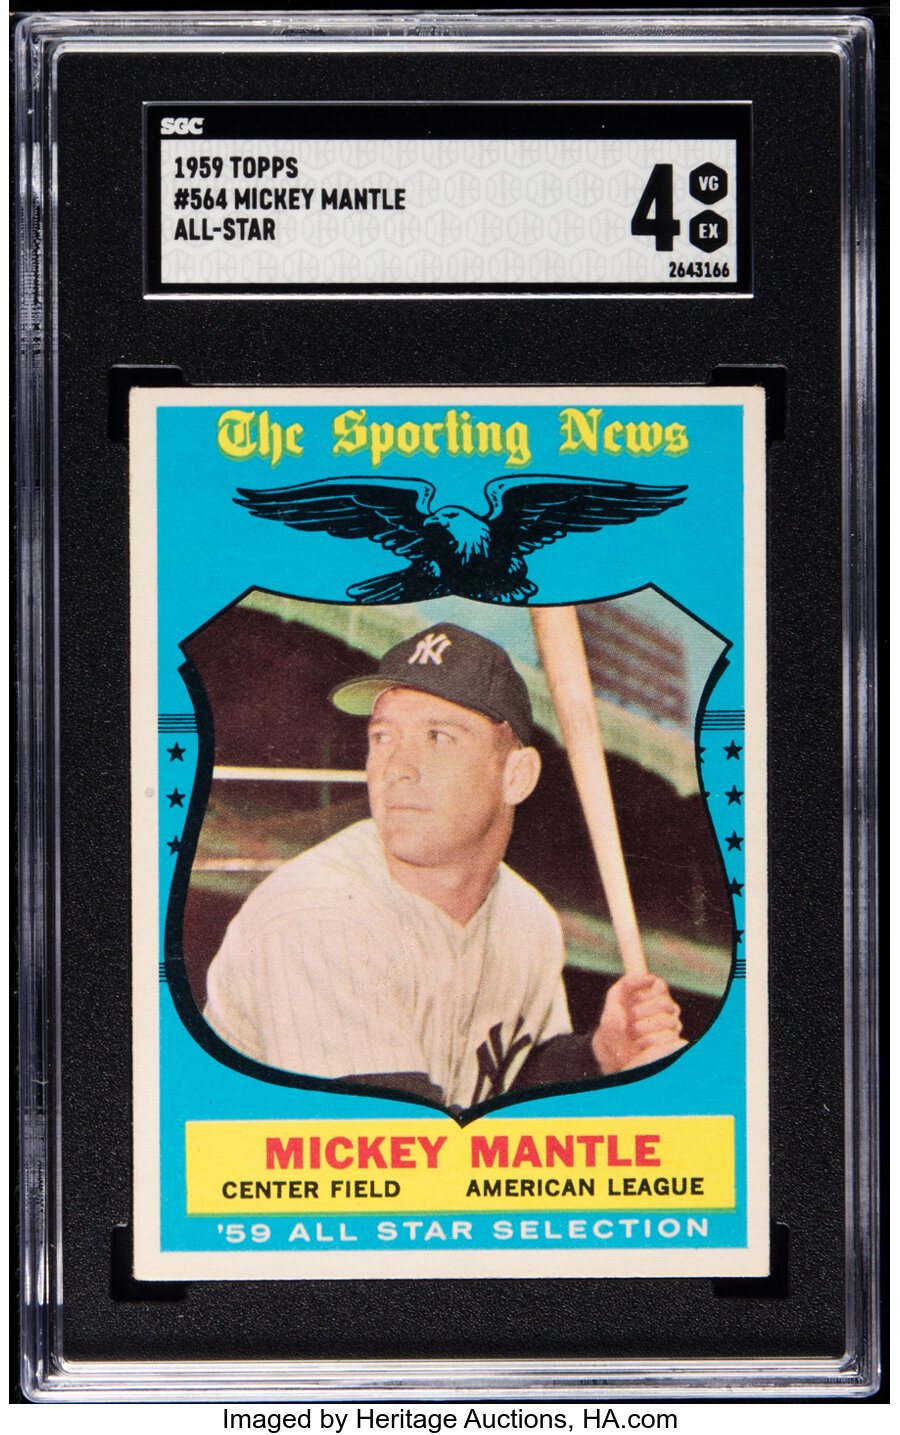 1959 Topps Mickey Mantle (All-Star) #564 SGC VG/EX 4